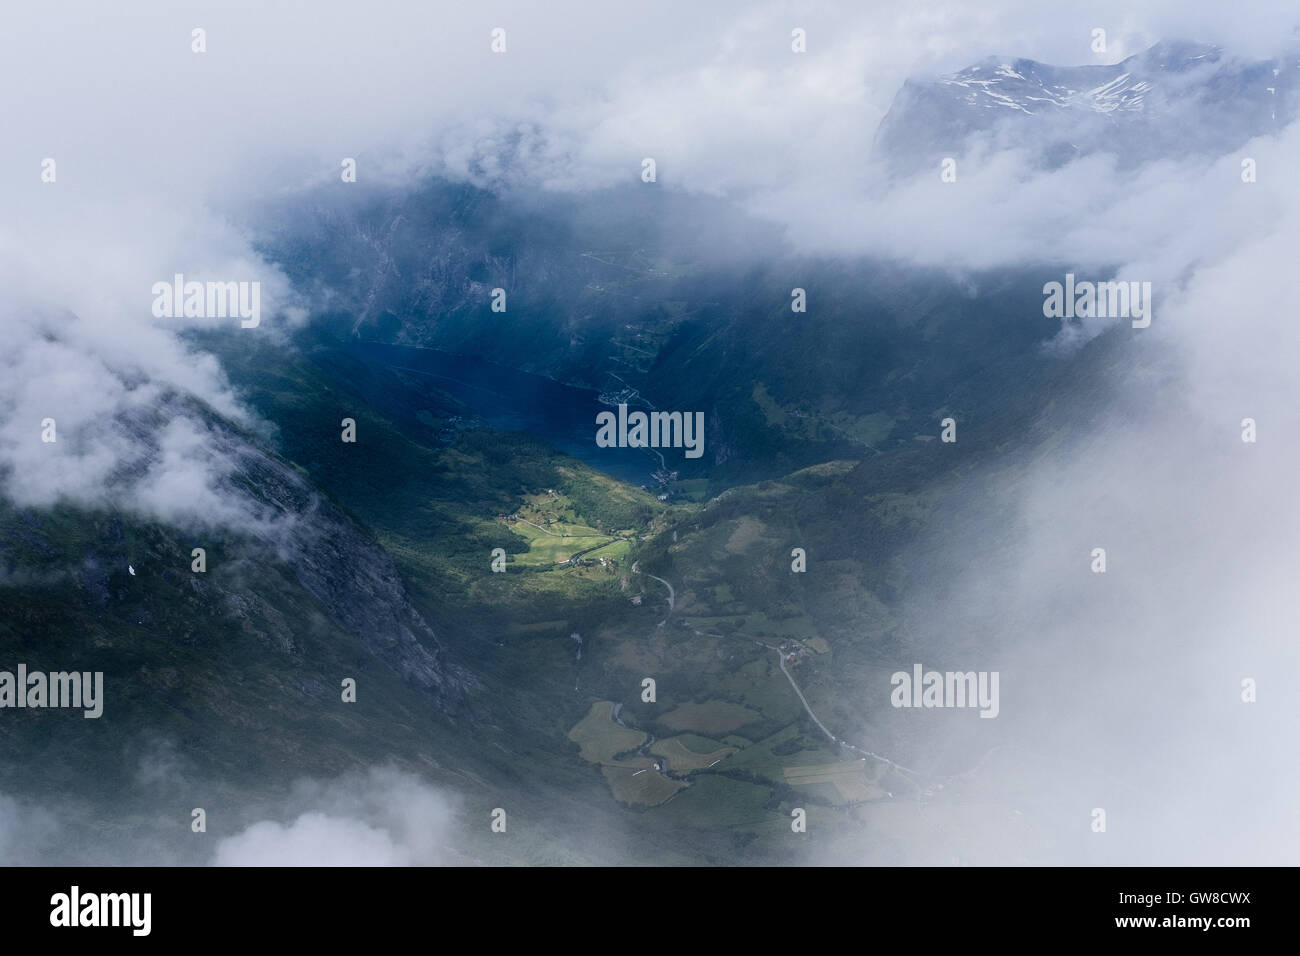 Geiranger fjord seen between clouds from Dalsnibba, Norway Stock Photo